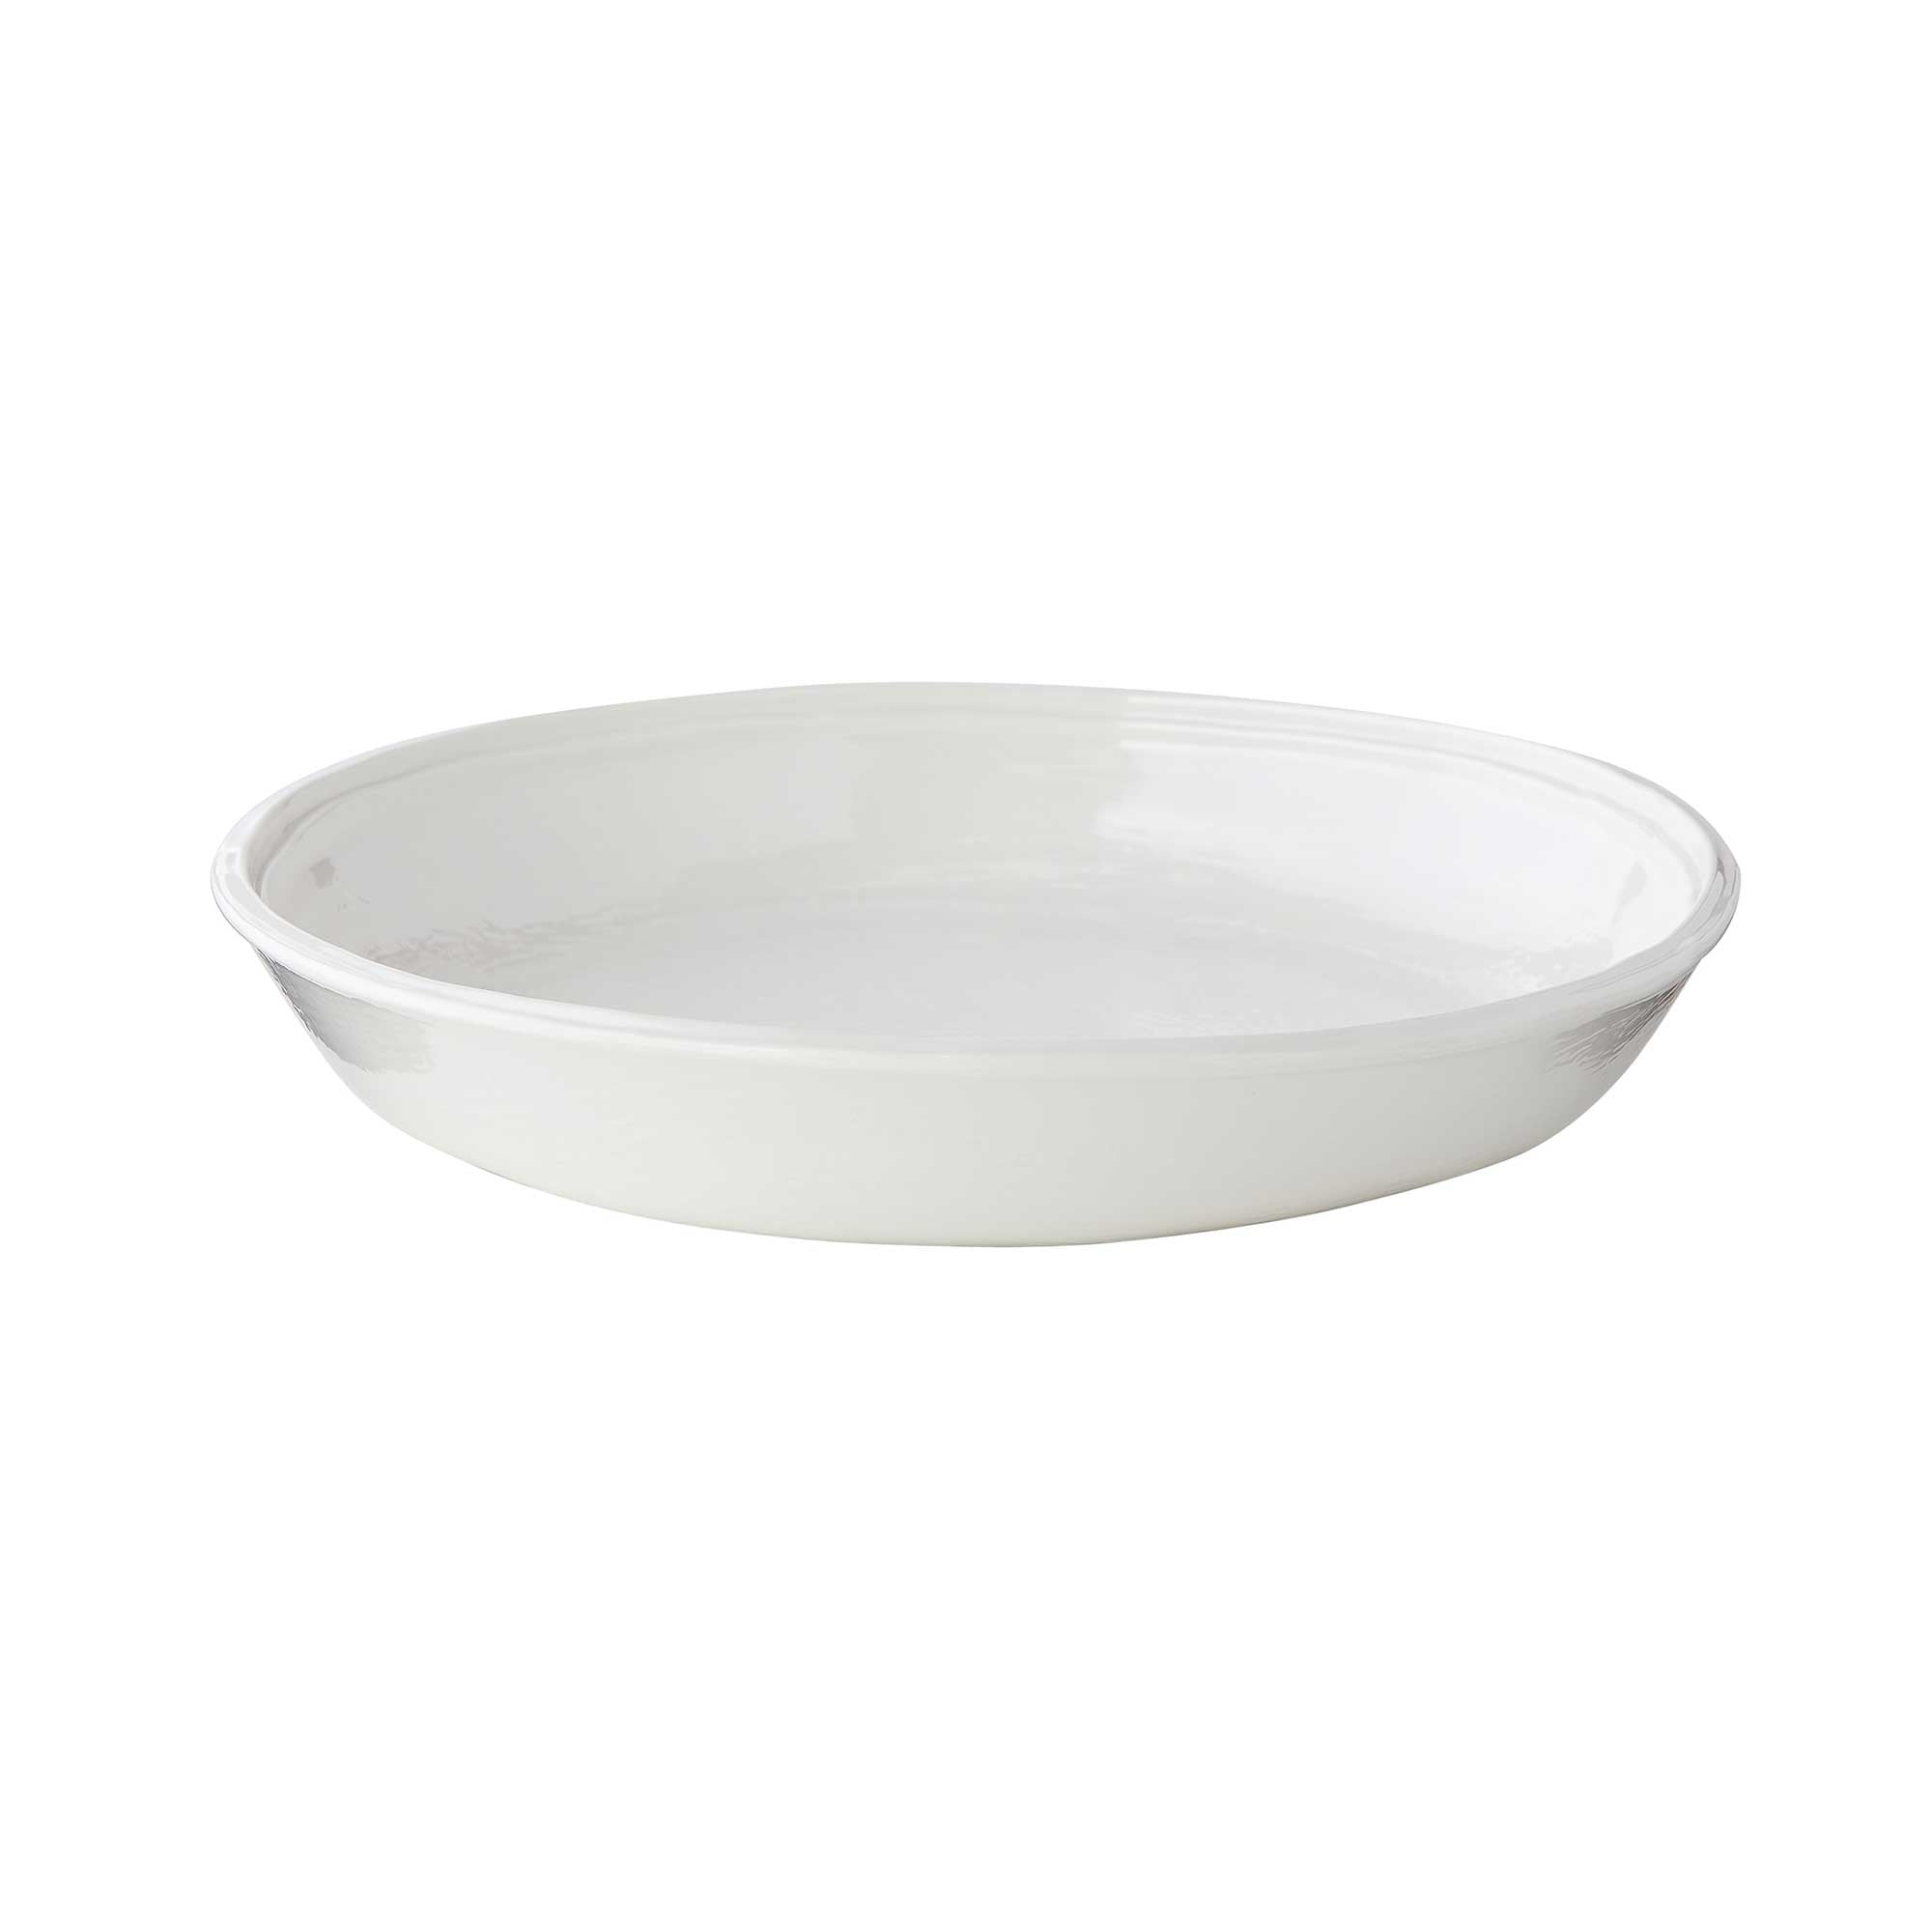 Lined Pasta Serving Bowl